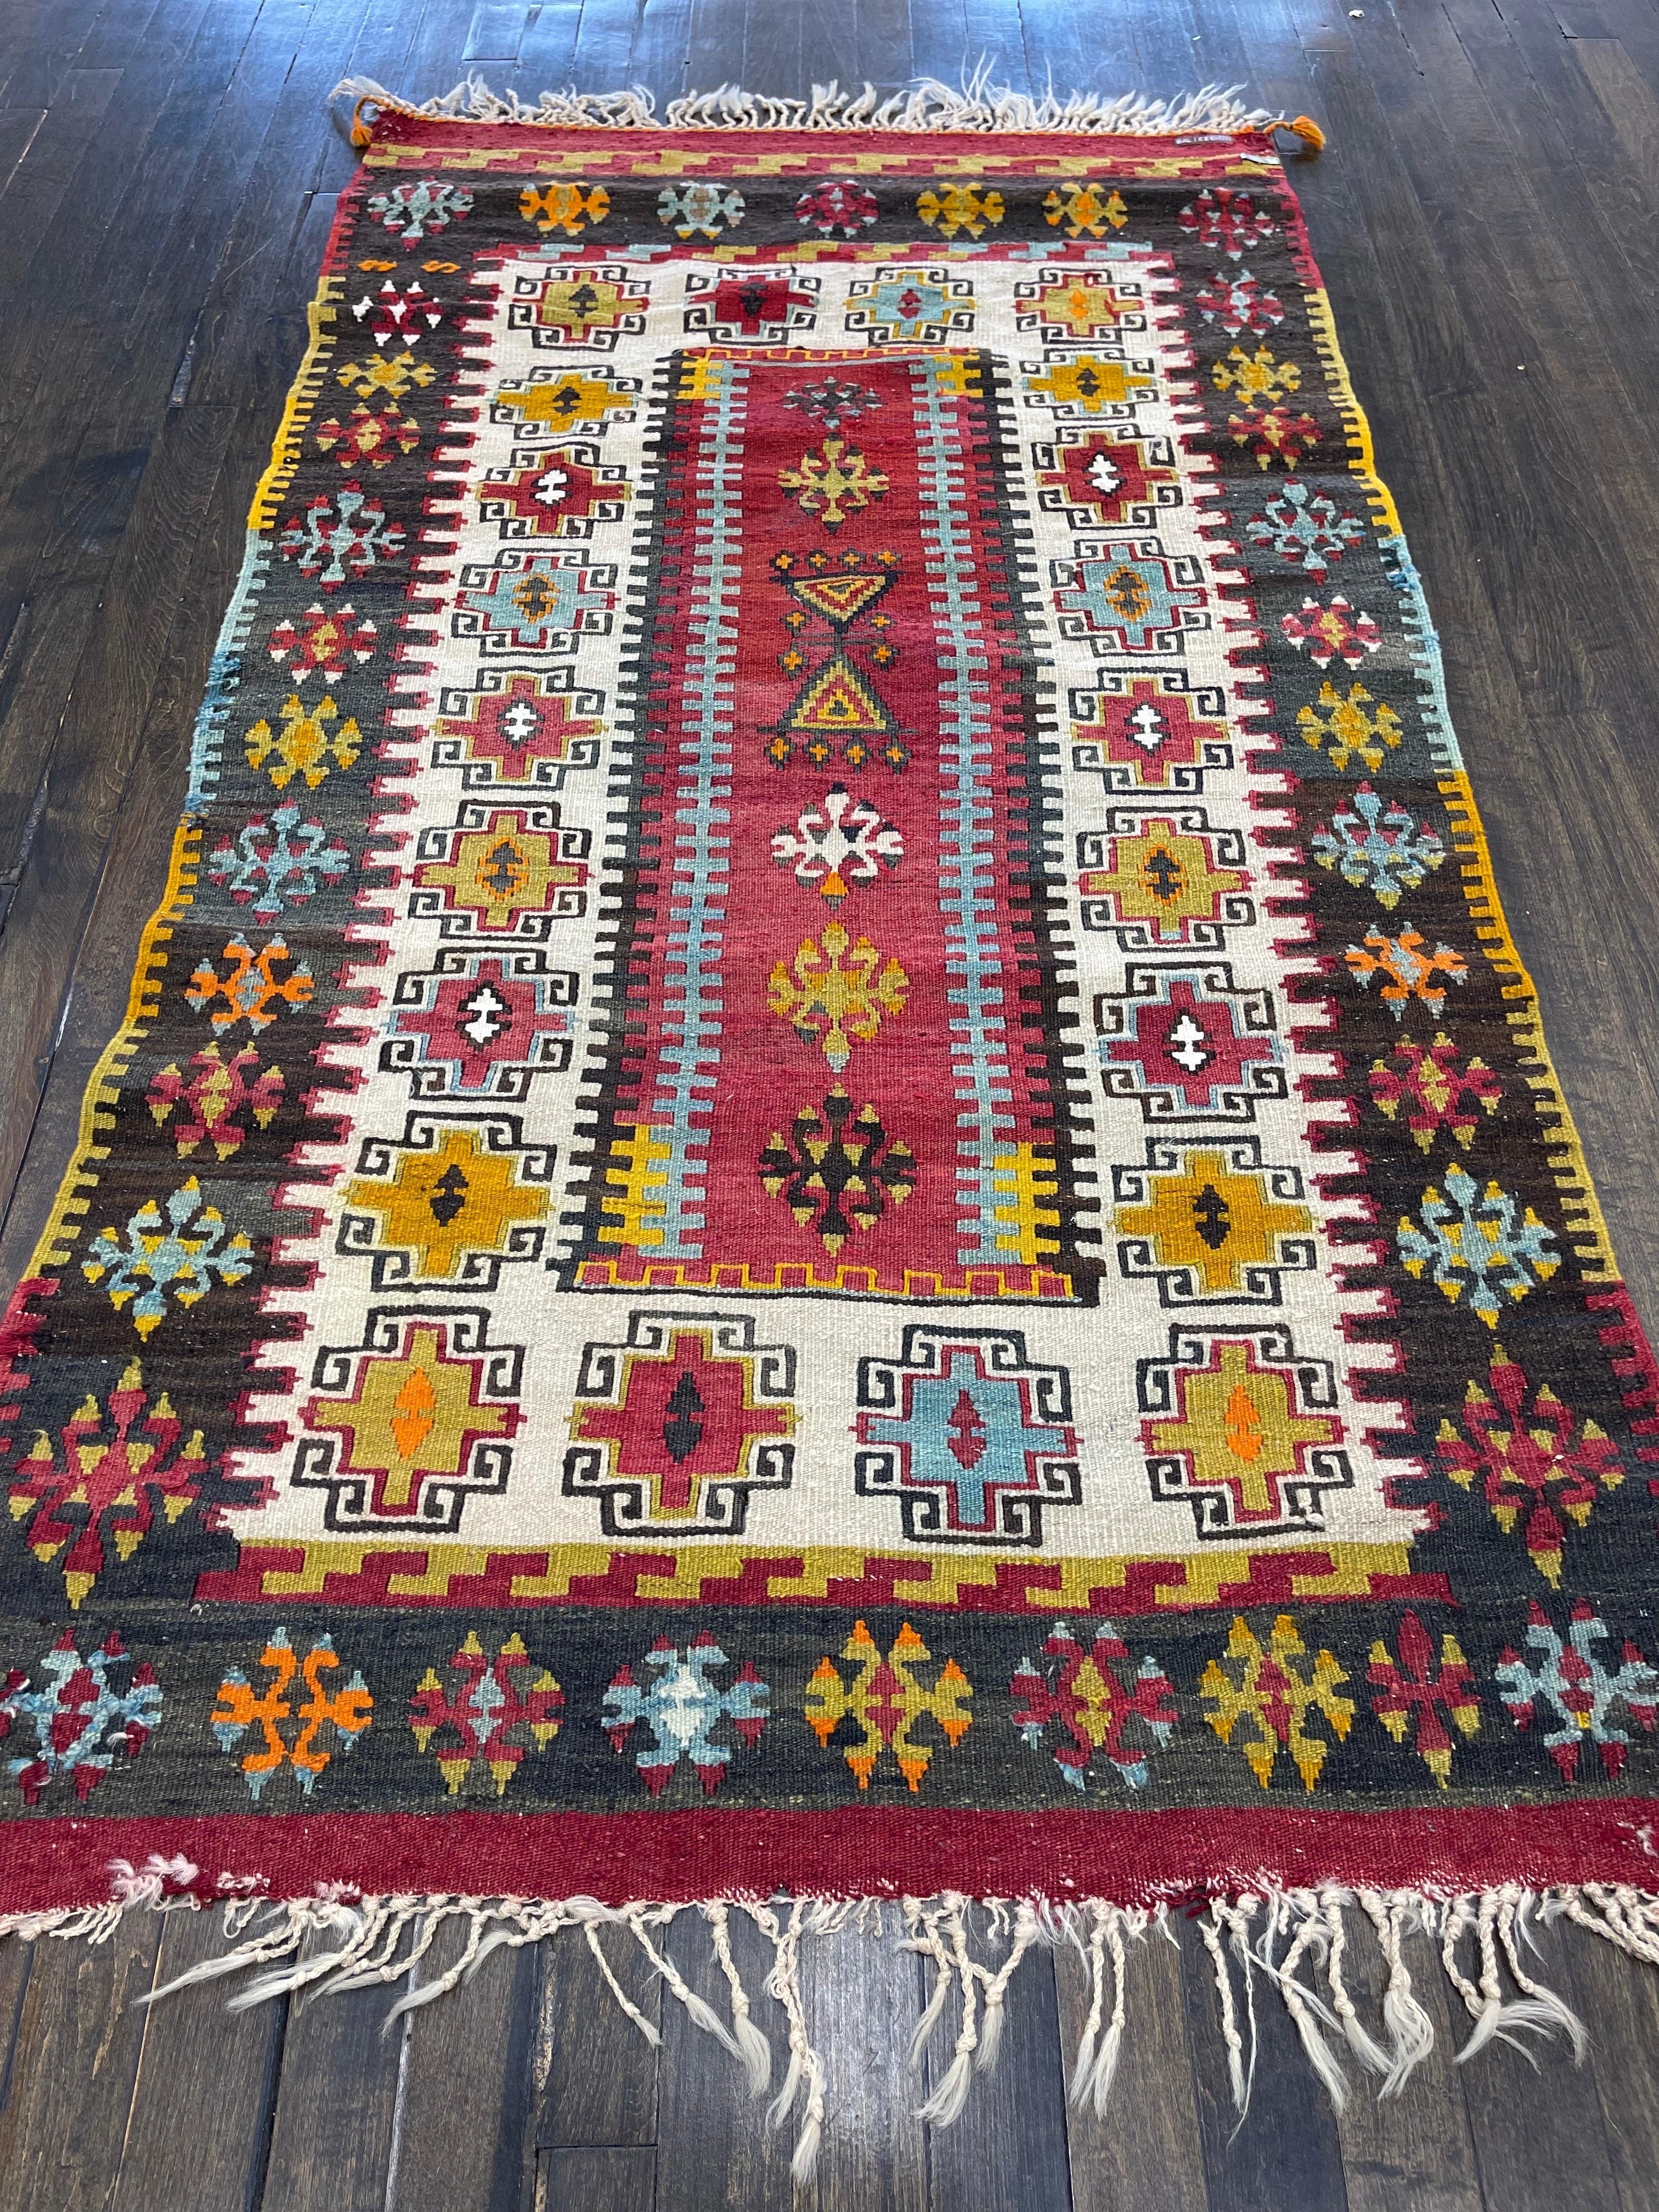 Stunning antique Turkish flatweave kilm, possibly made in Konya. Featuring clear crispy colors in orange, red, many shades of blues, brown, yellow, green and ivory. This kilm is perfect for wall hanging as a Velcro strip has been seen across the